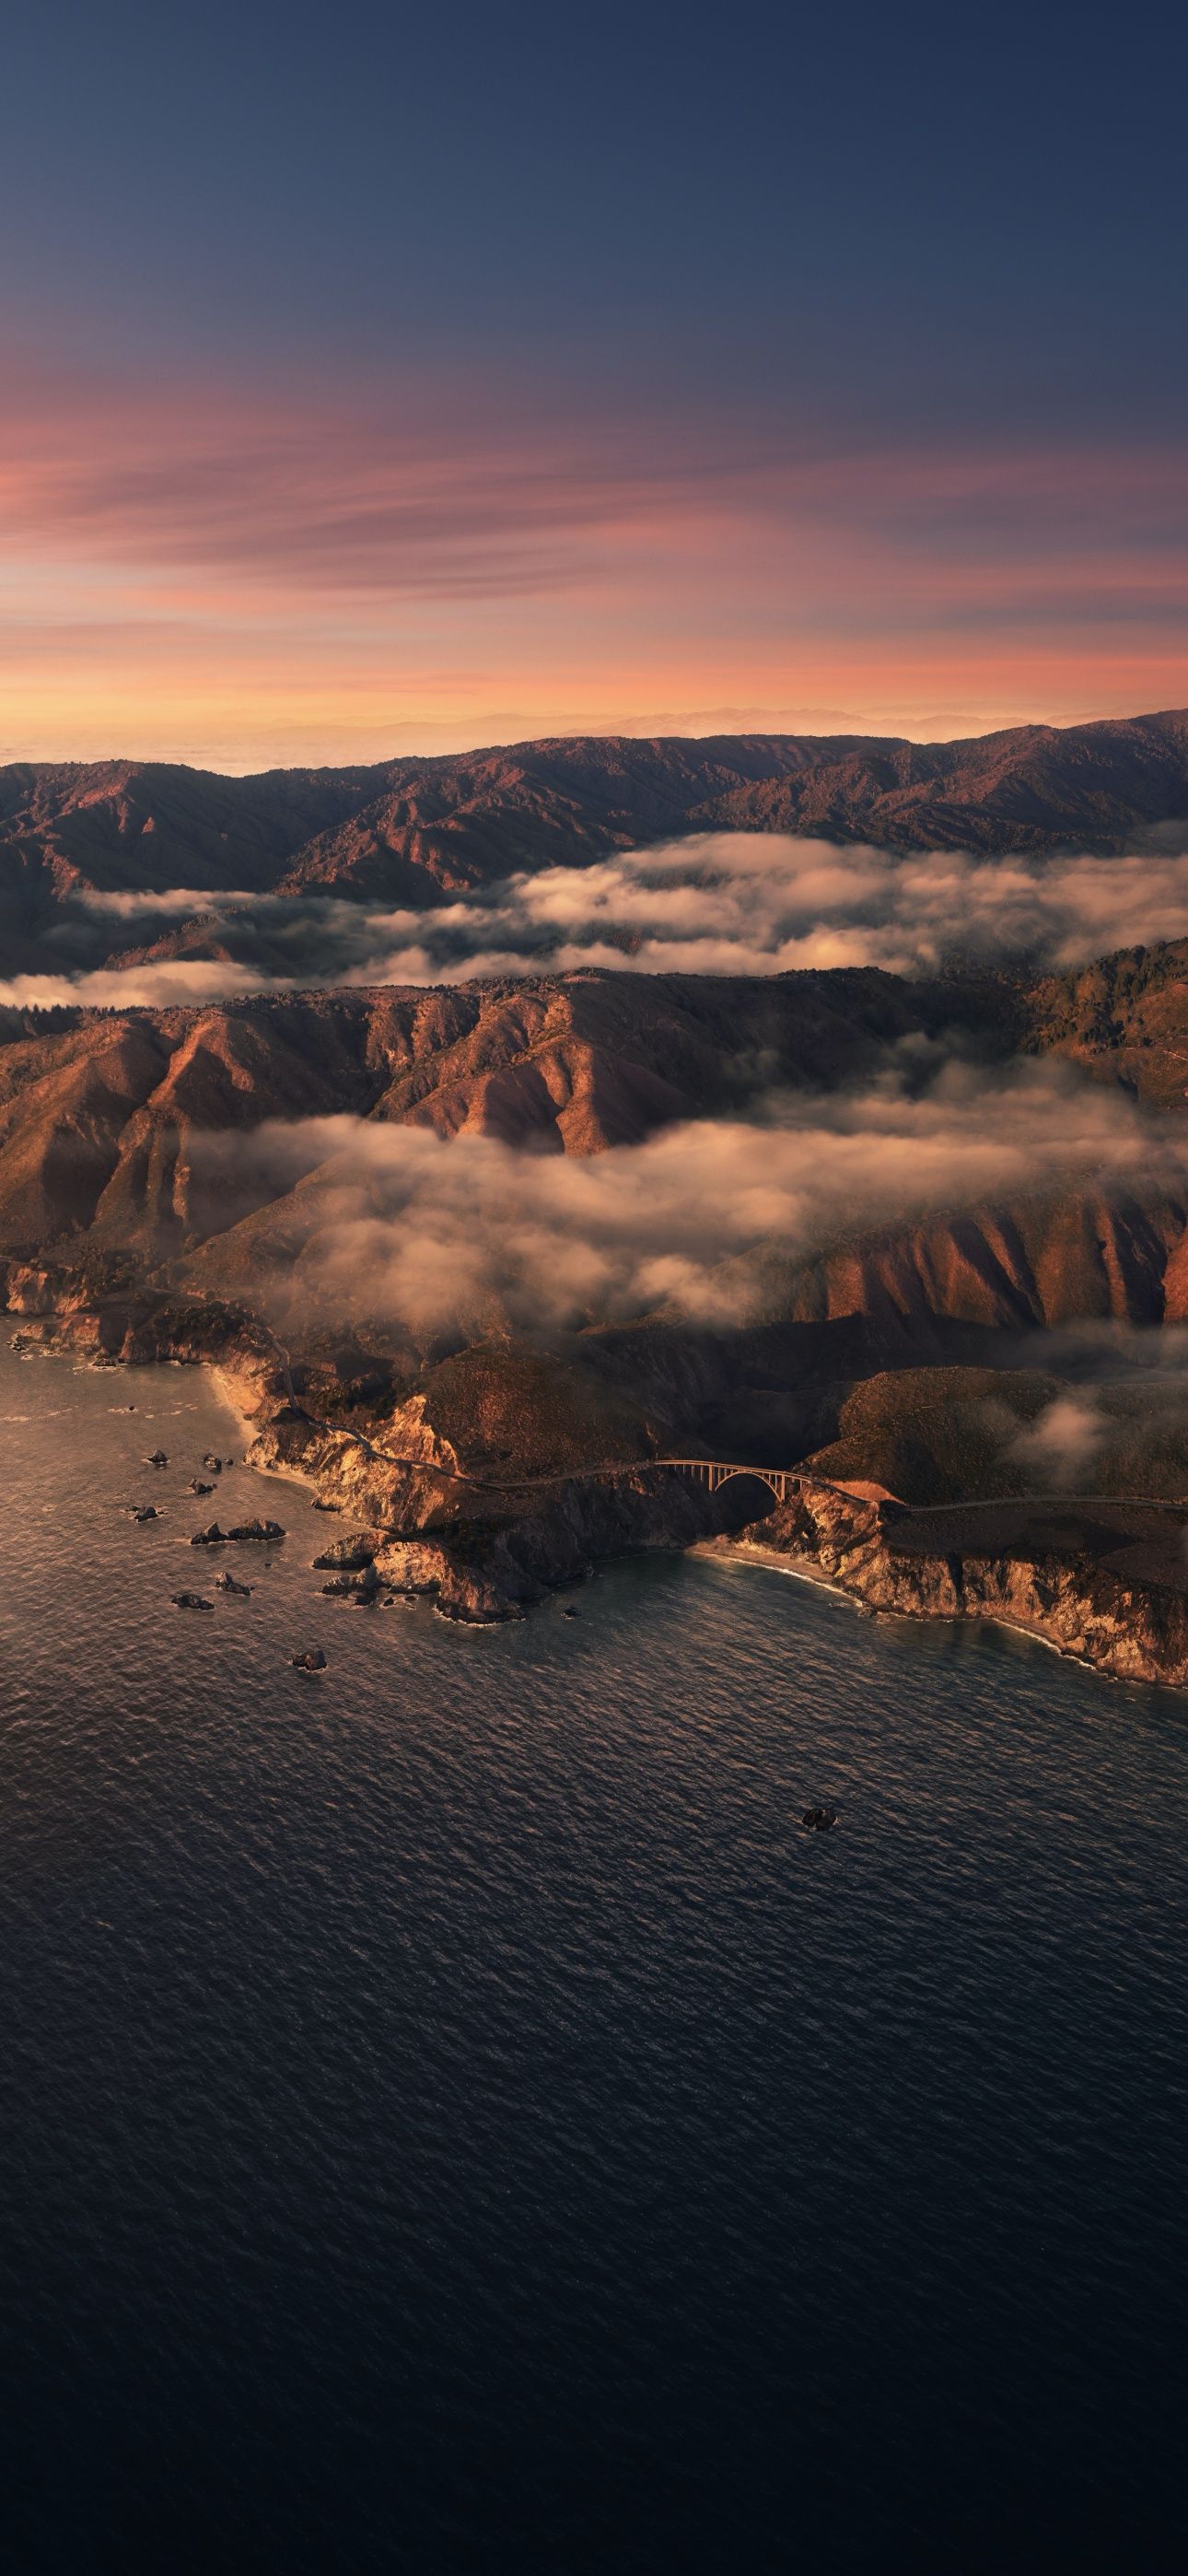 Aerial view of a coastal town surrounded by mountains - California, sunrise